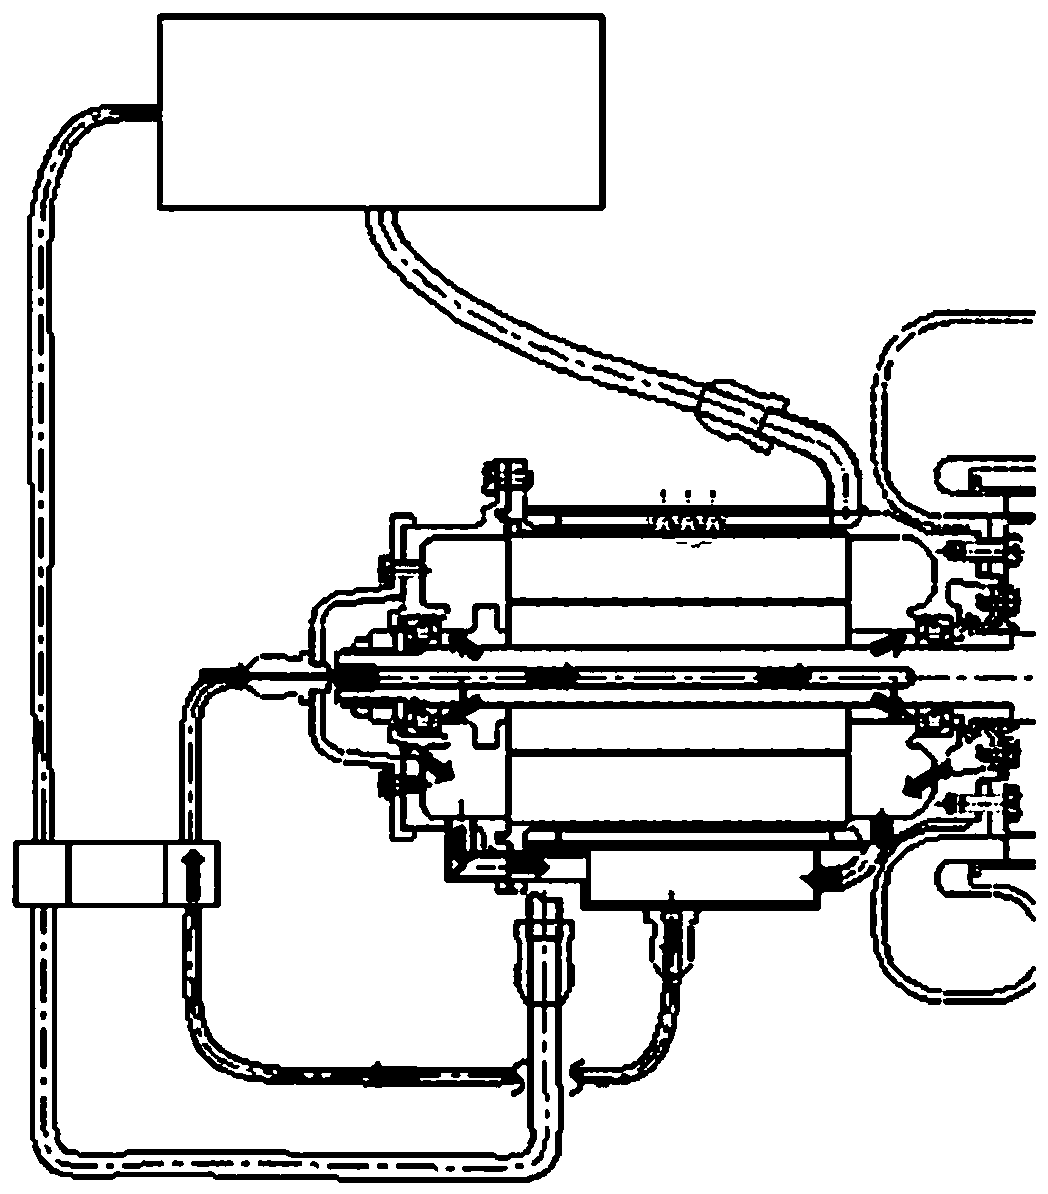 Shaft hole cooling and lubrication system